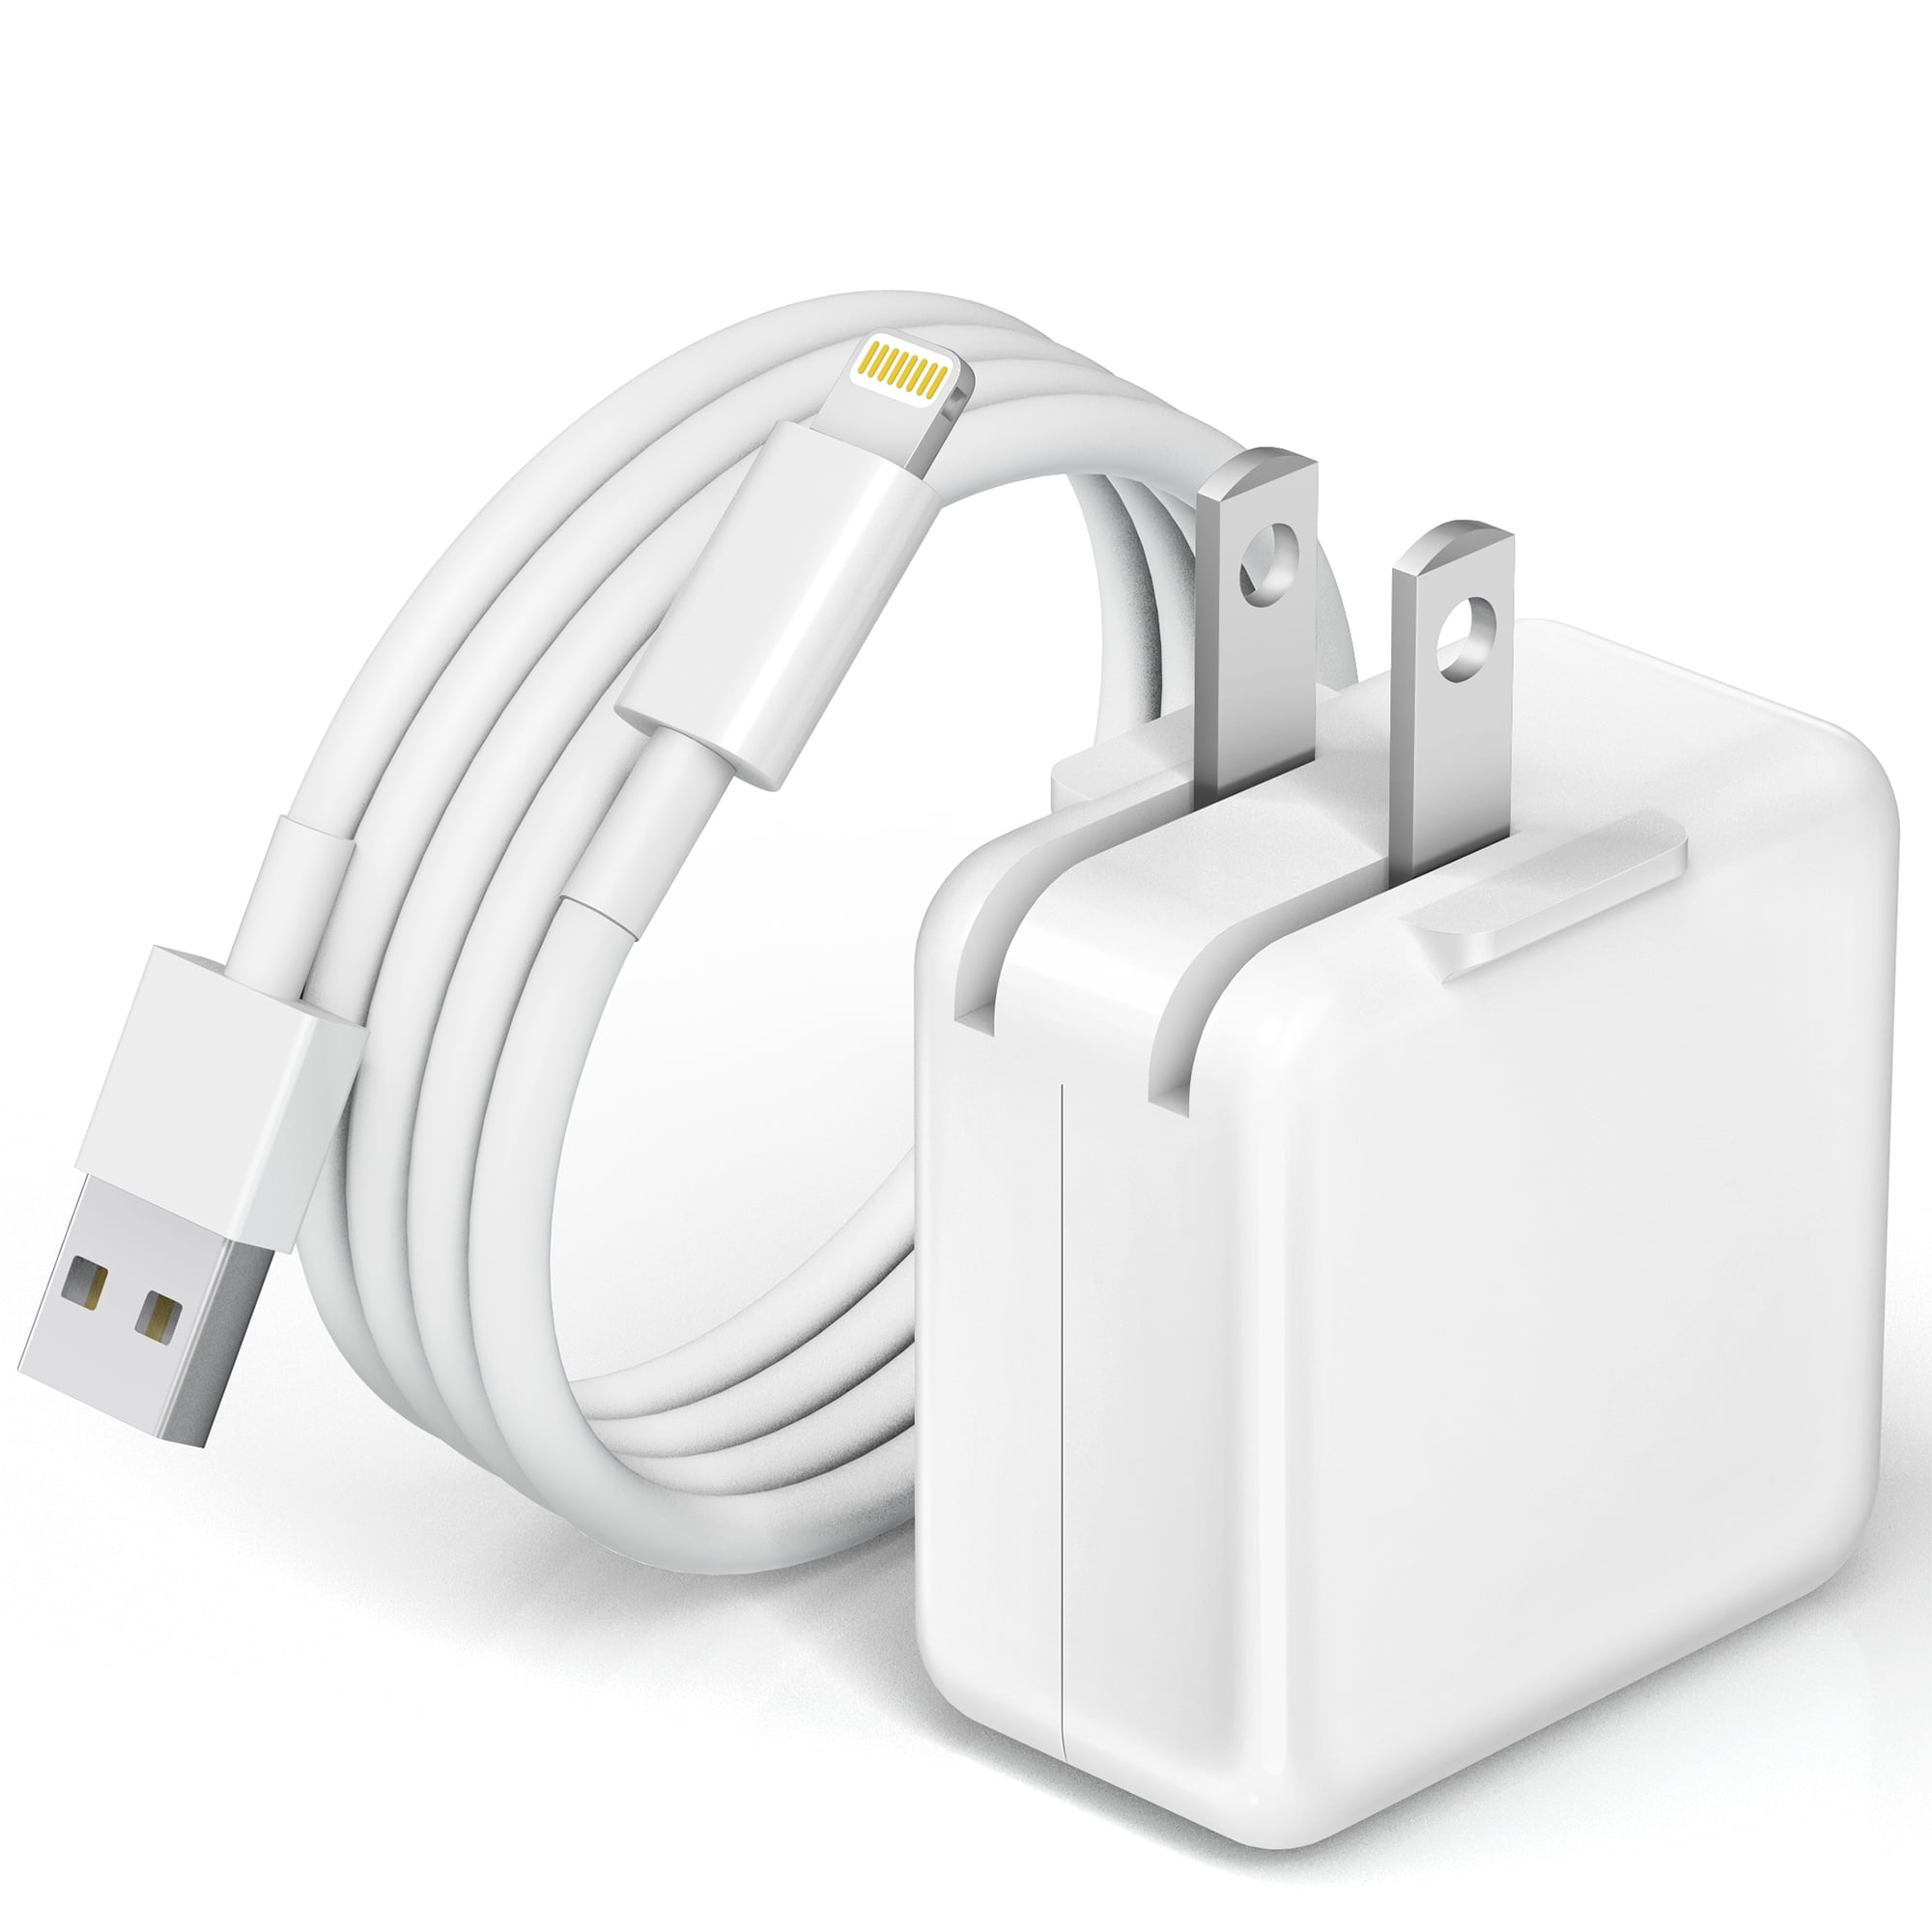 indelukke redaktionelle lobby iPhone 14 13 12 11 Charger iPad Charger-Apple MFI Certified-12W USB Wall  Charger Foldable Portable Travel Plug with USB Charging Cable Compatible  with iPhone, iPad, iPad Mini, iPad Air 1/2/3, Airpod - Walmart.com